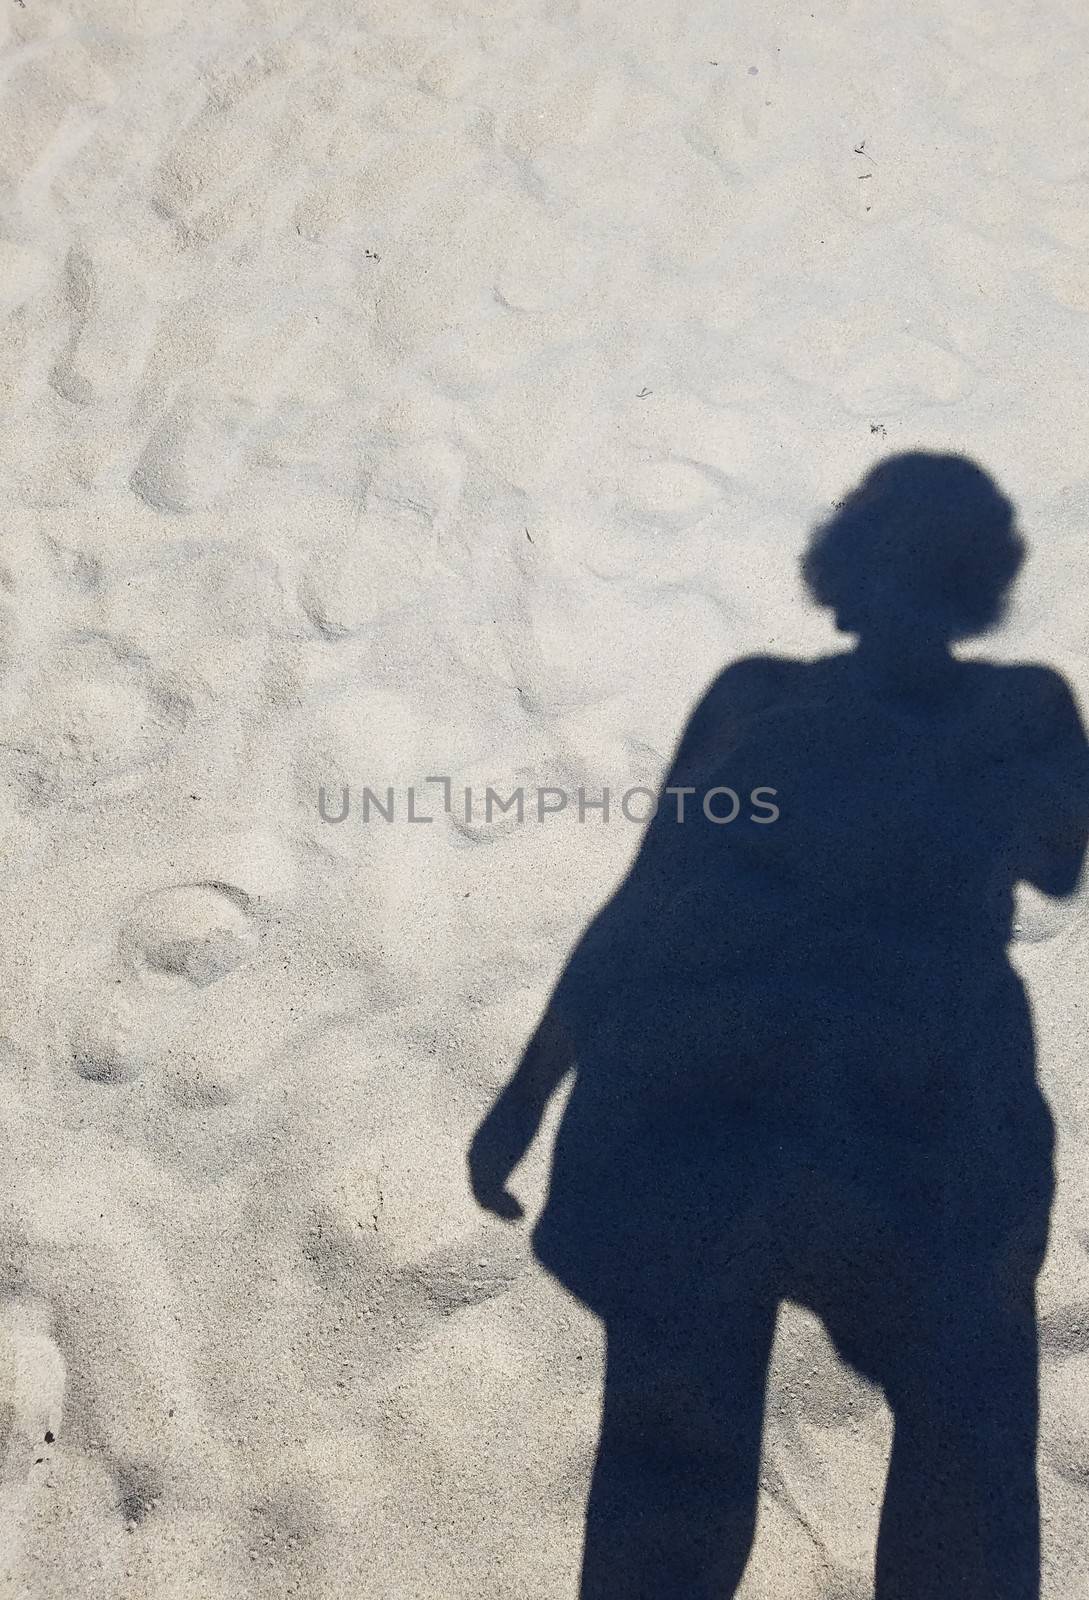 shadow of woman or girl in sand at beach by stockphotofan1